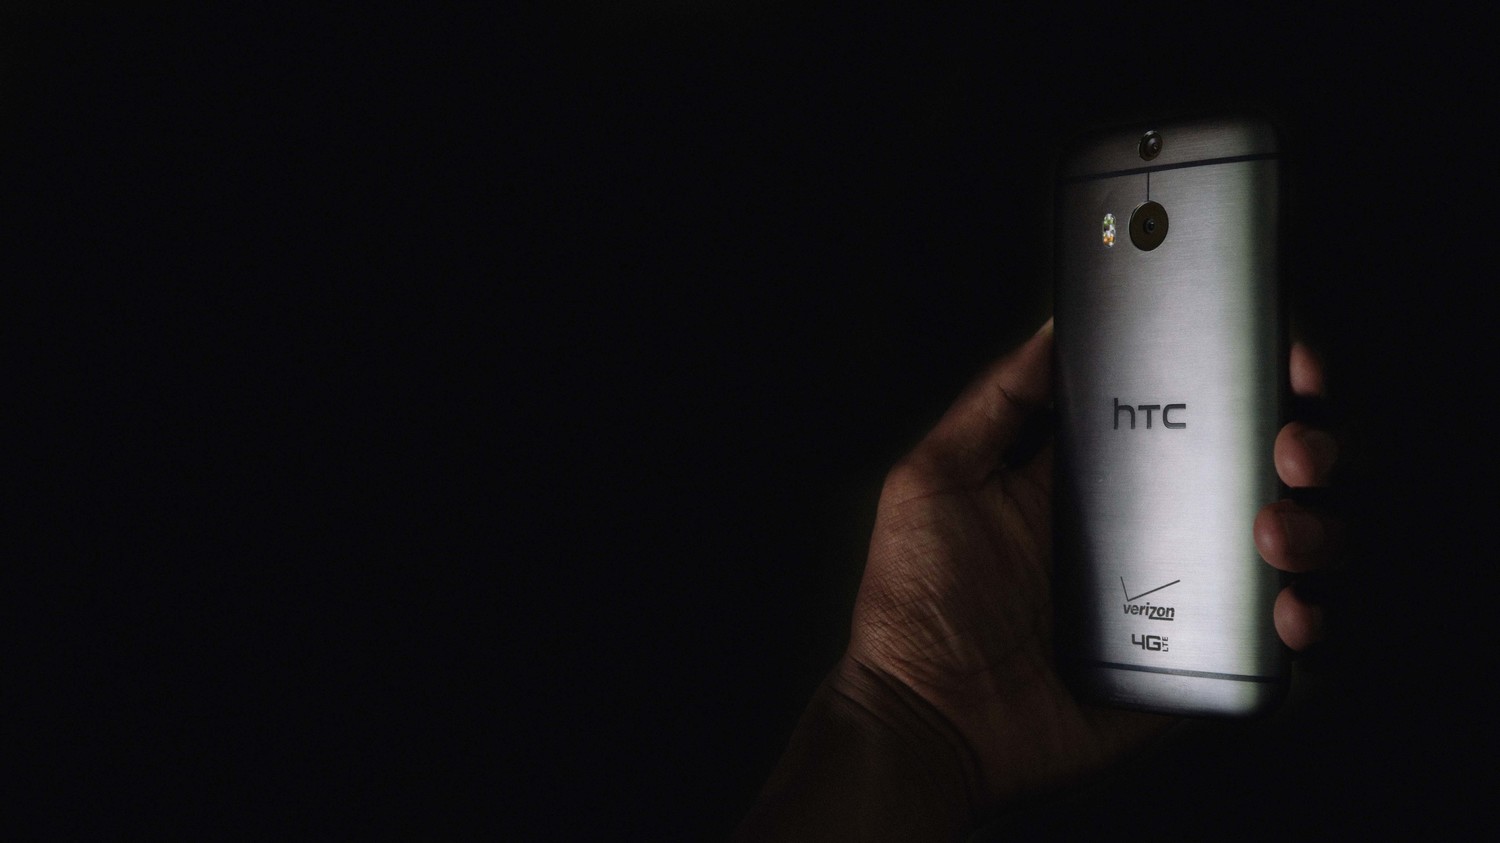 HTC One M8: Top Android Device This Year